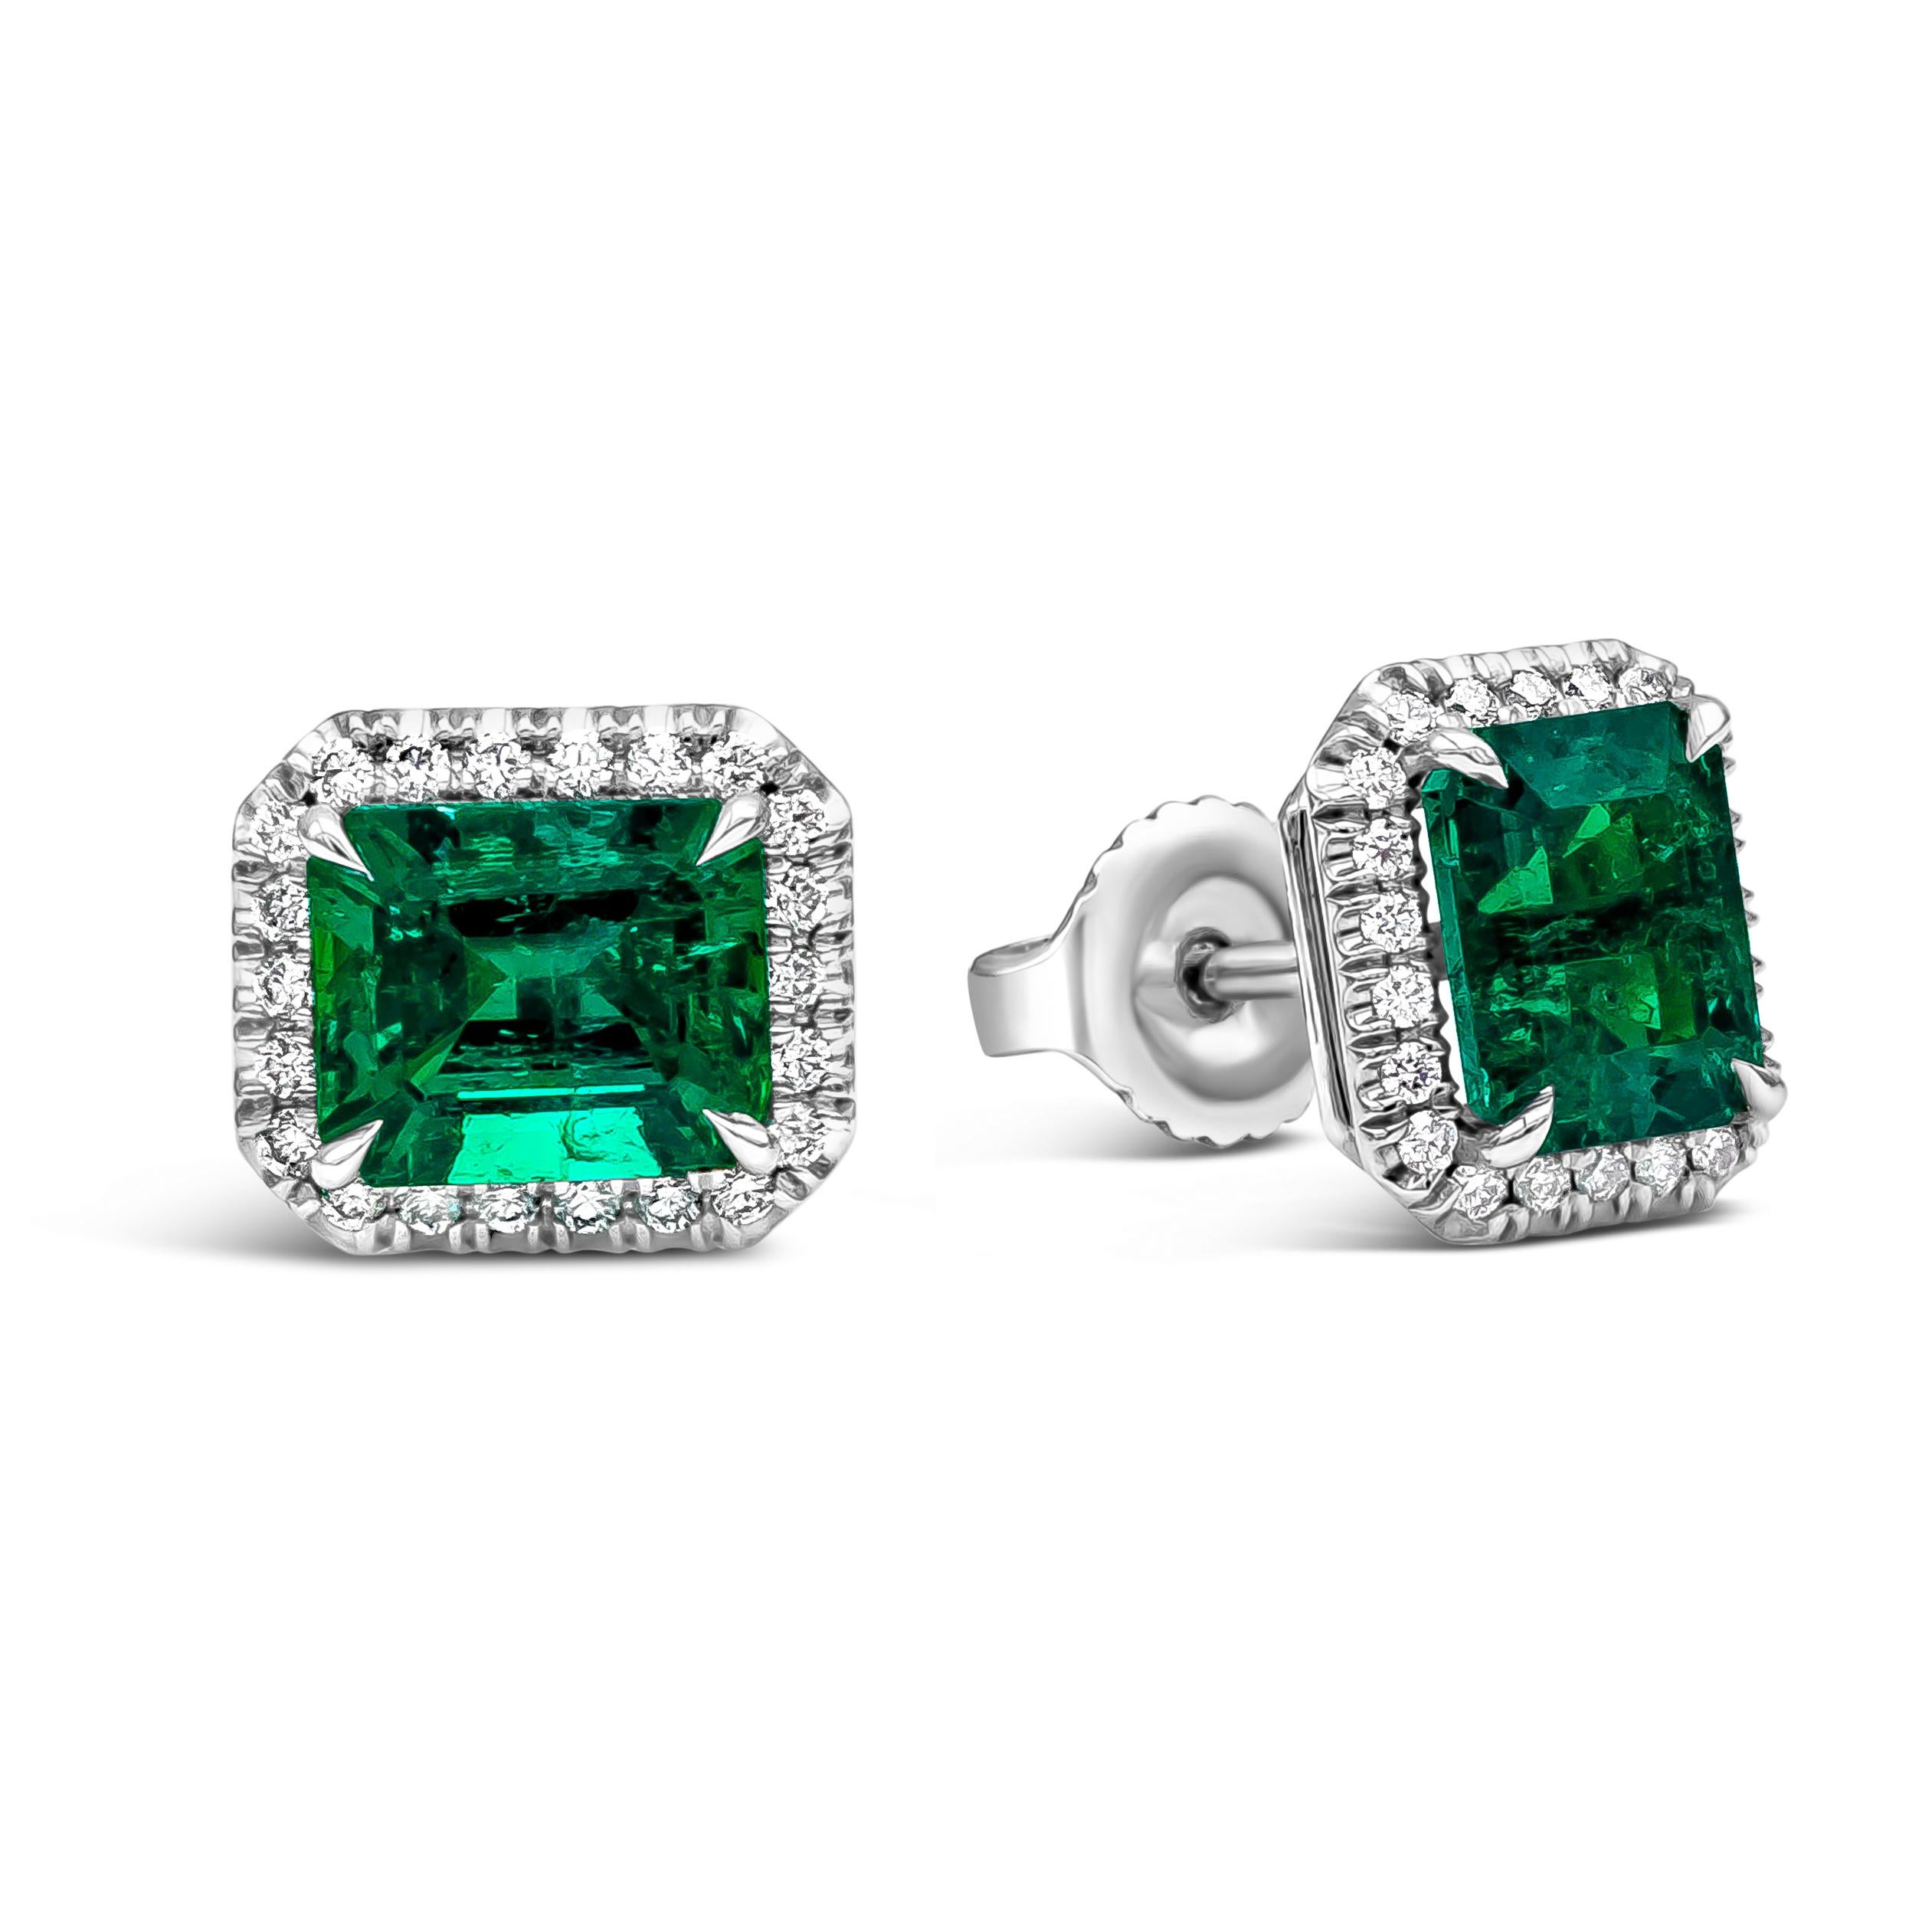 Contemporary 2.41 Carats Emerald Cut Colombian Muzo Emerald with Diamond Halo Stud Earrings For Sale